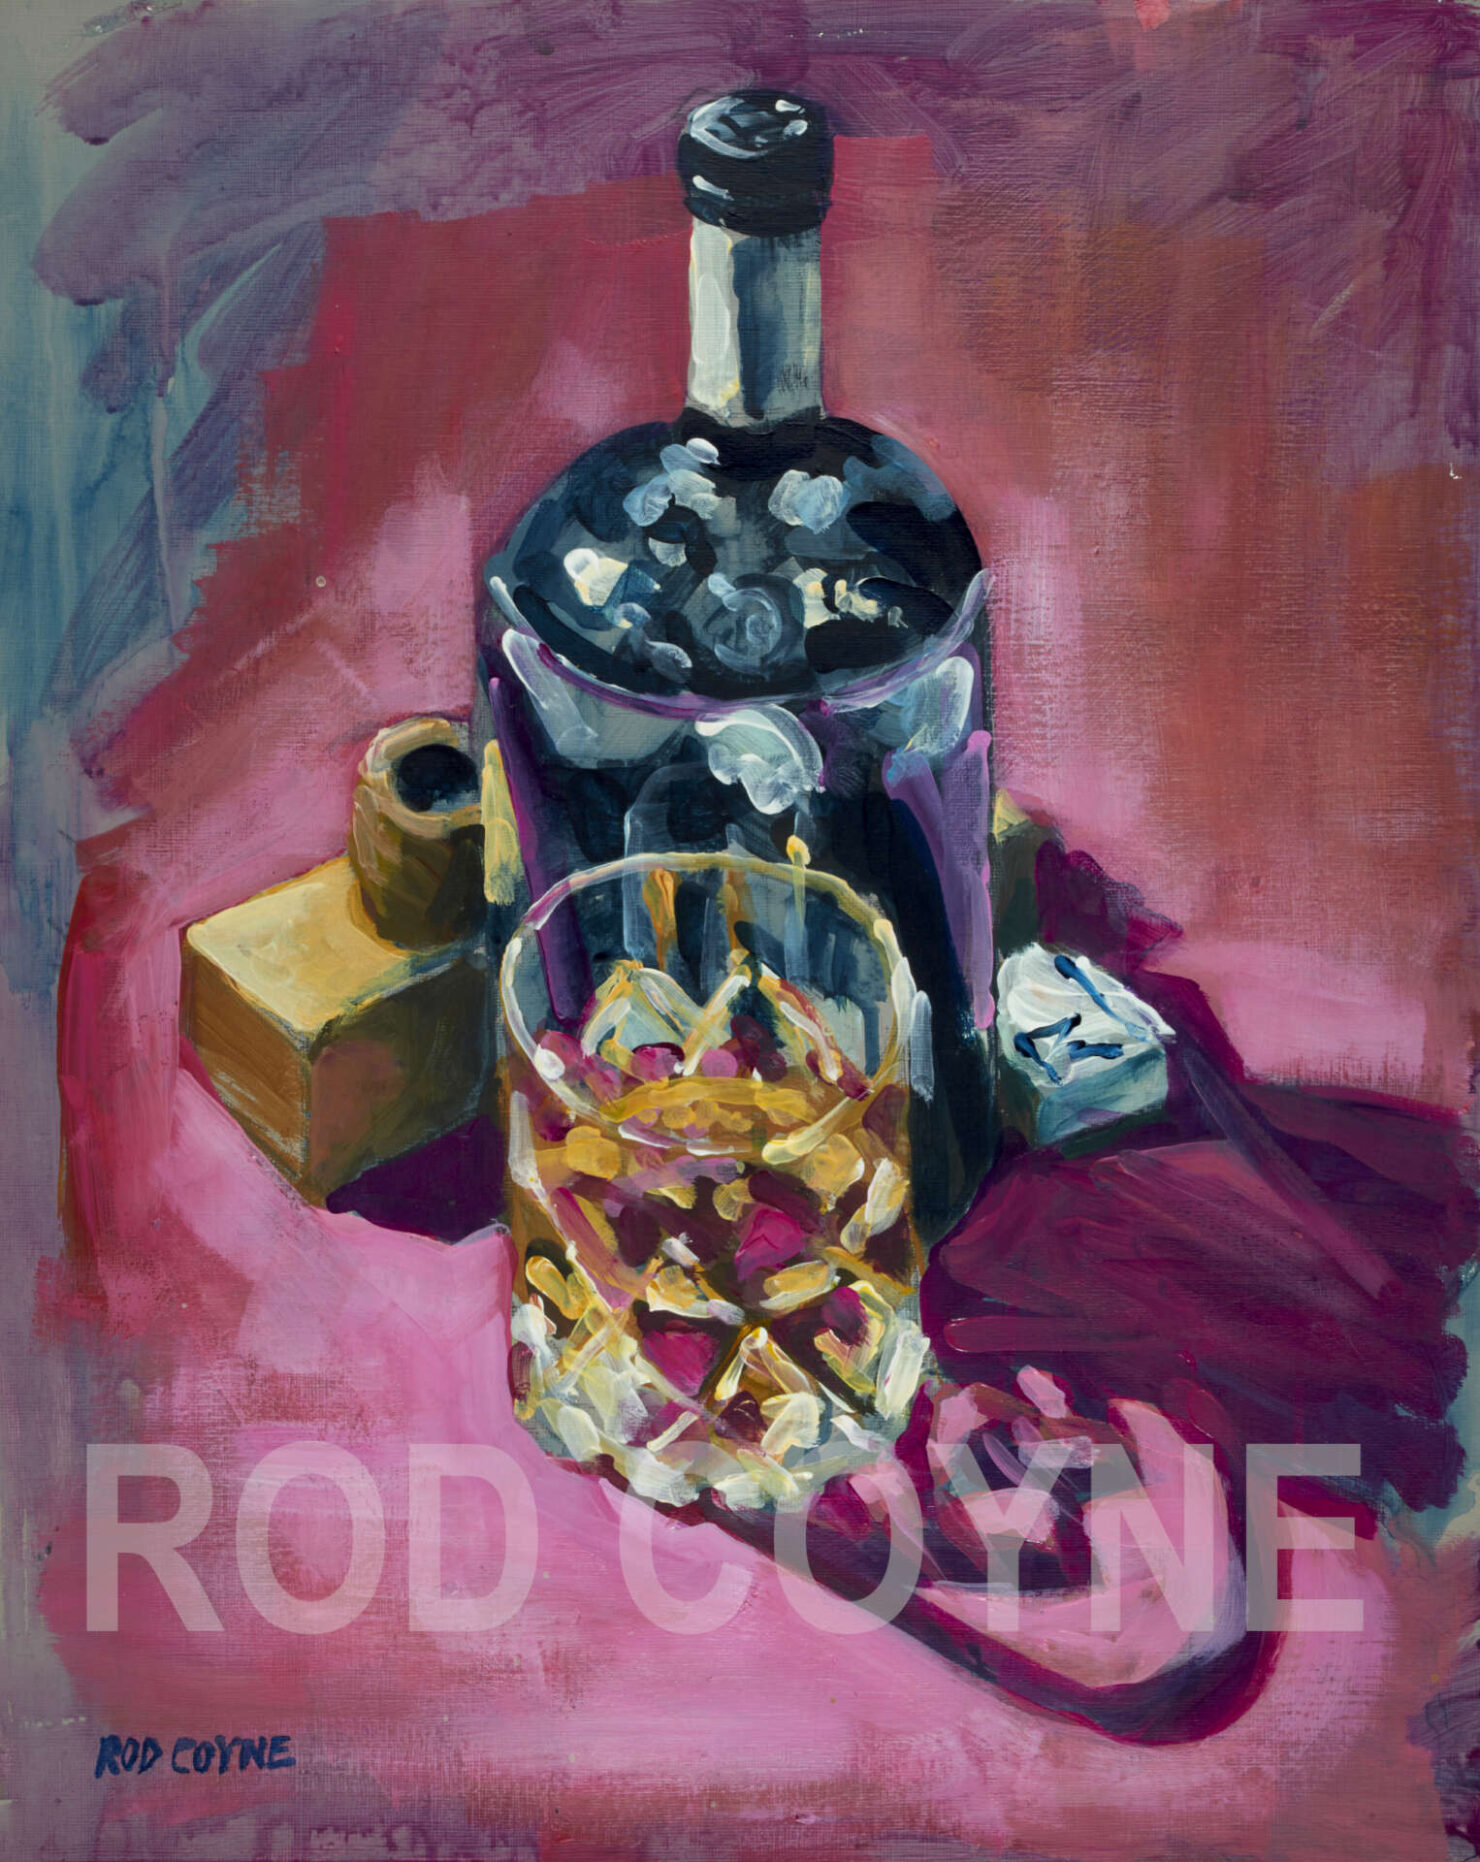 artist rod coyne's still life painting "ultimate fathers day" is shown here, watermarked.